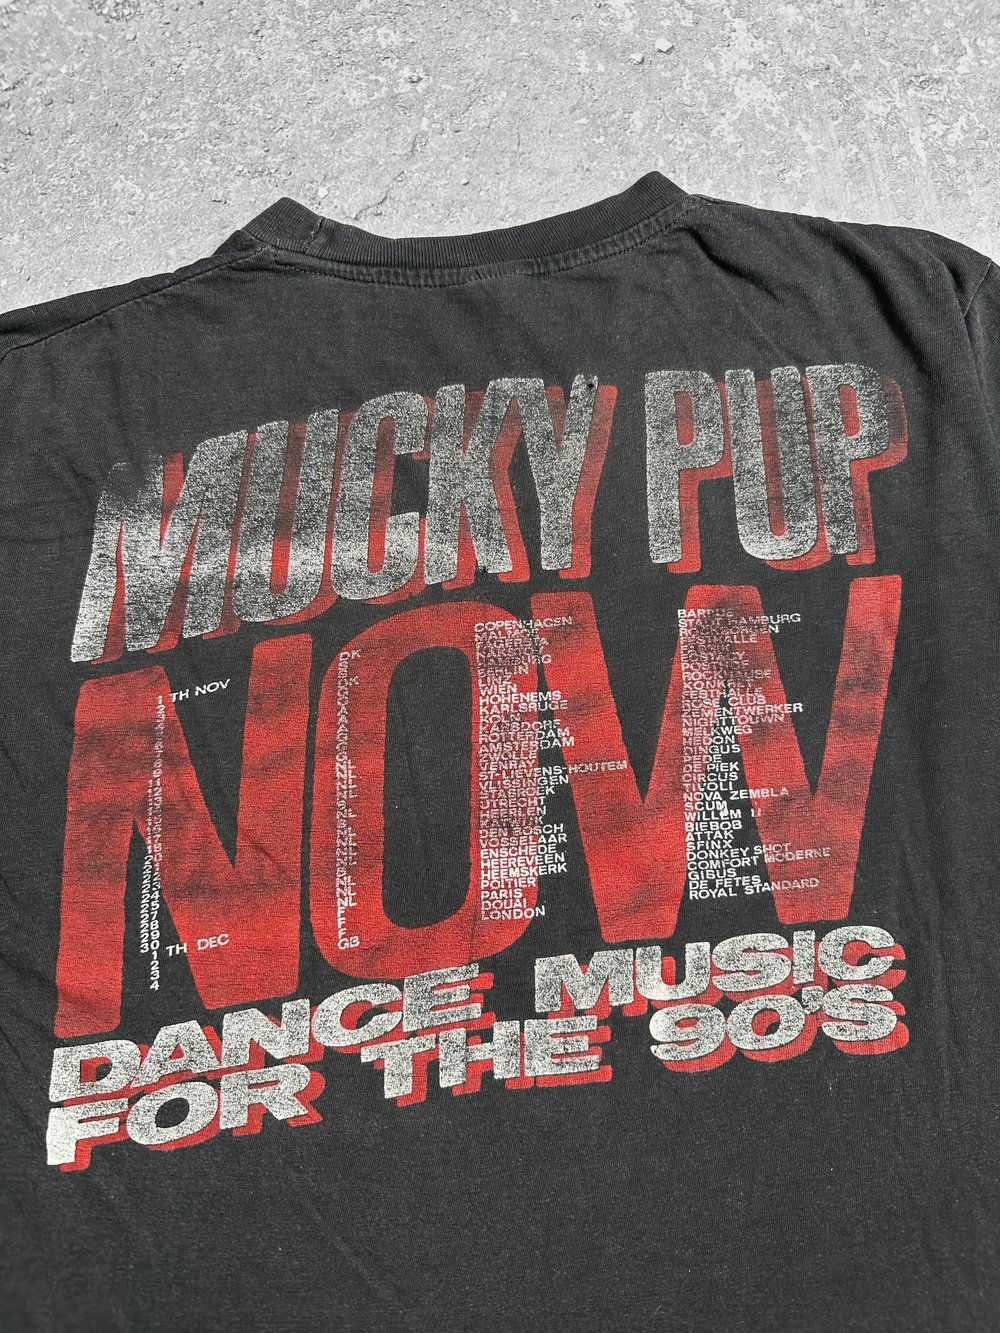 Rare* Mucky Pup 1990 'Now: Dance Music For The 90's' T-Shirt 